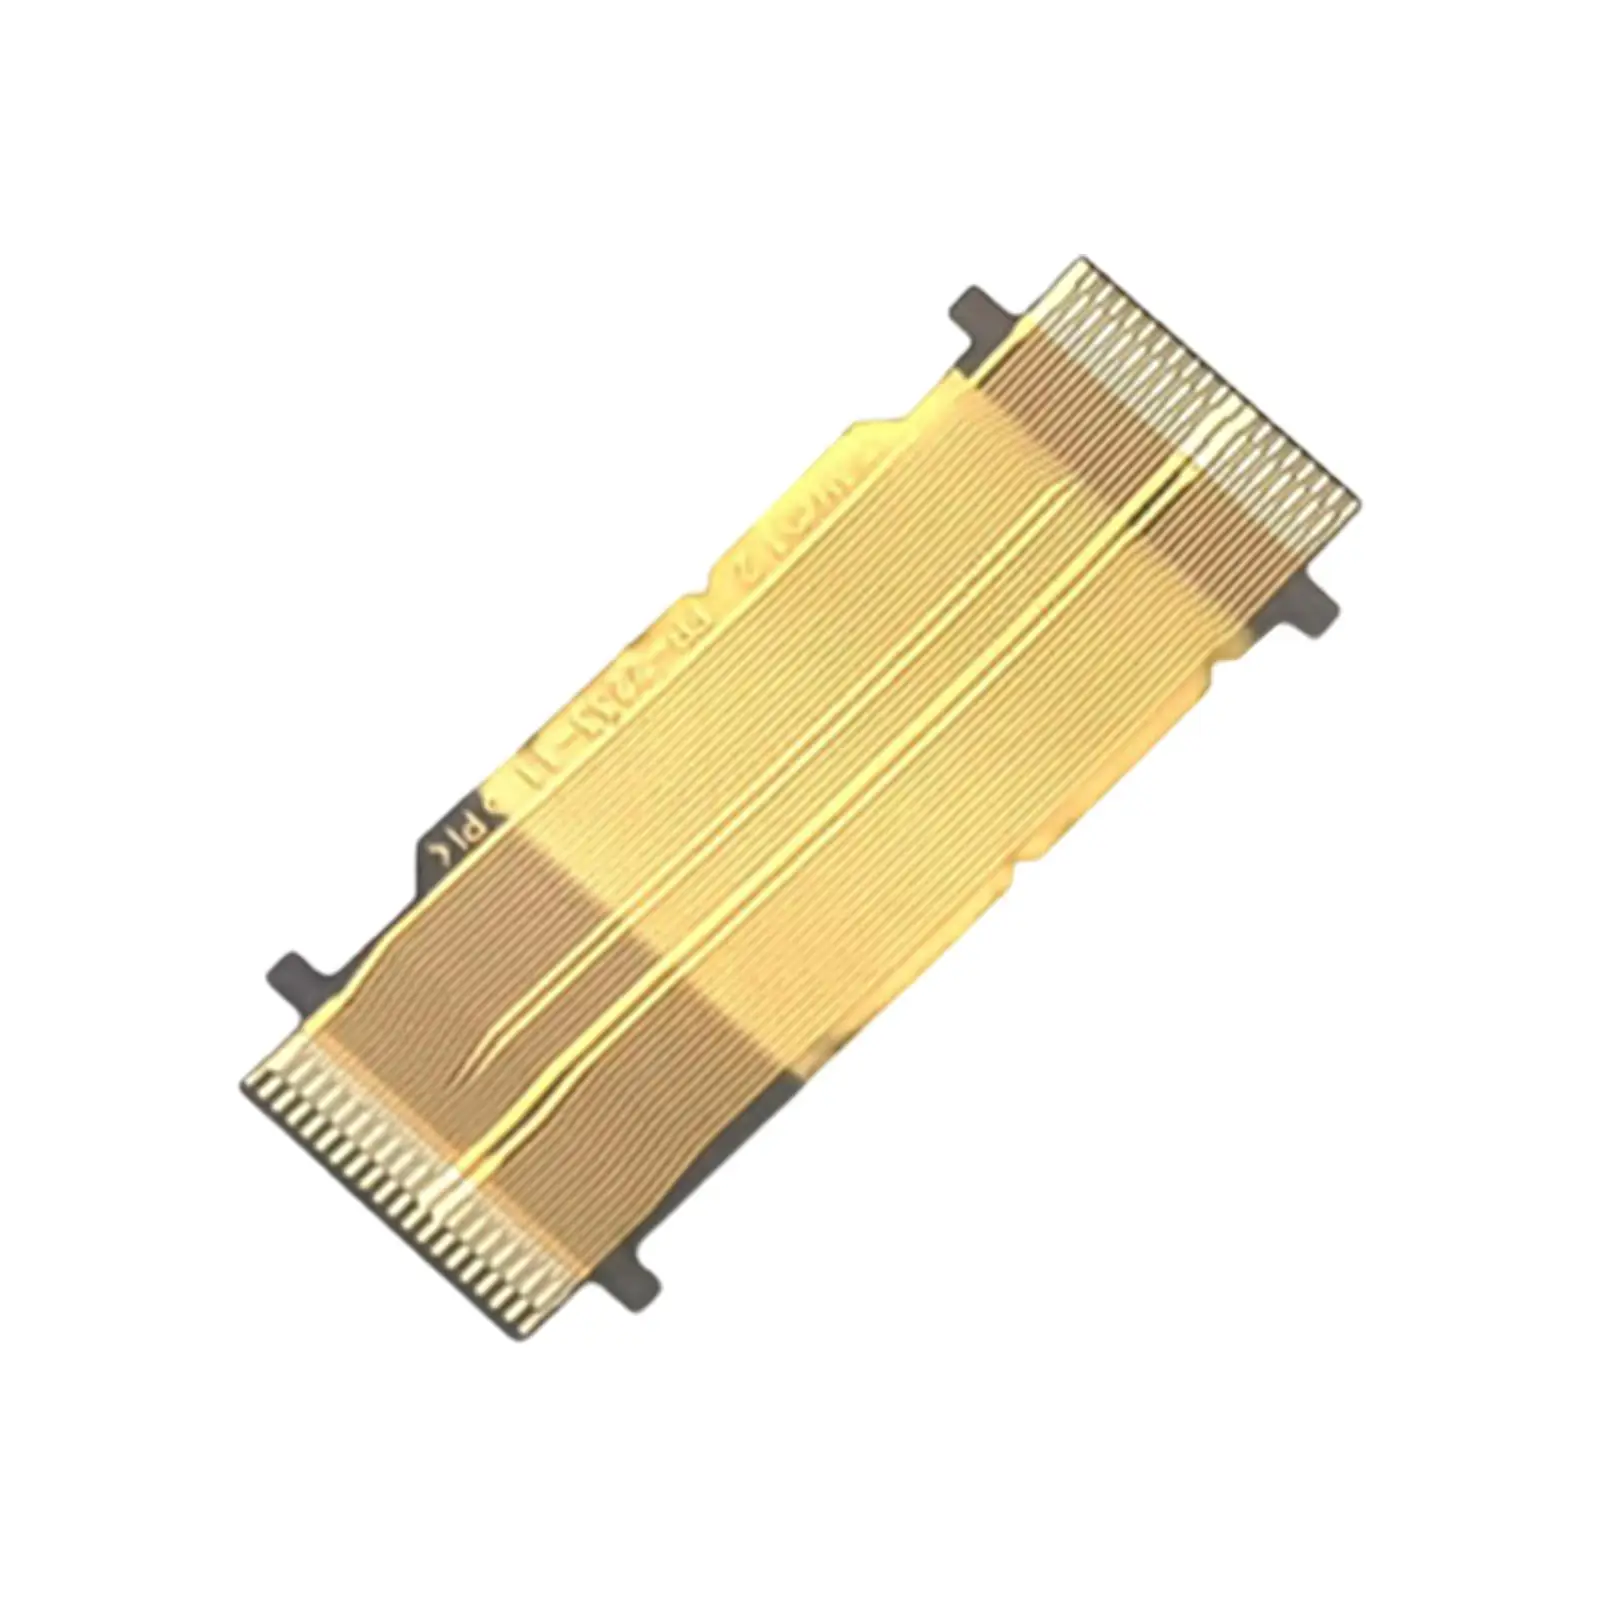 Camera Motherboard Connection Flex Cable for Dsc RX100M3 Accessories Repair